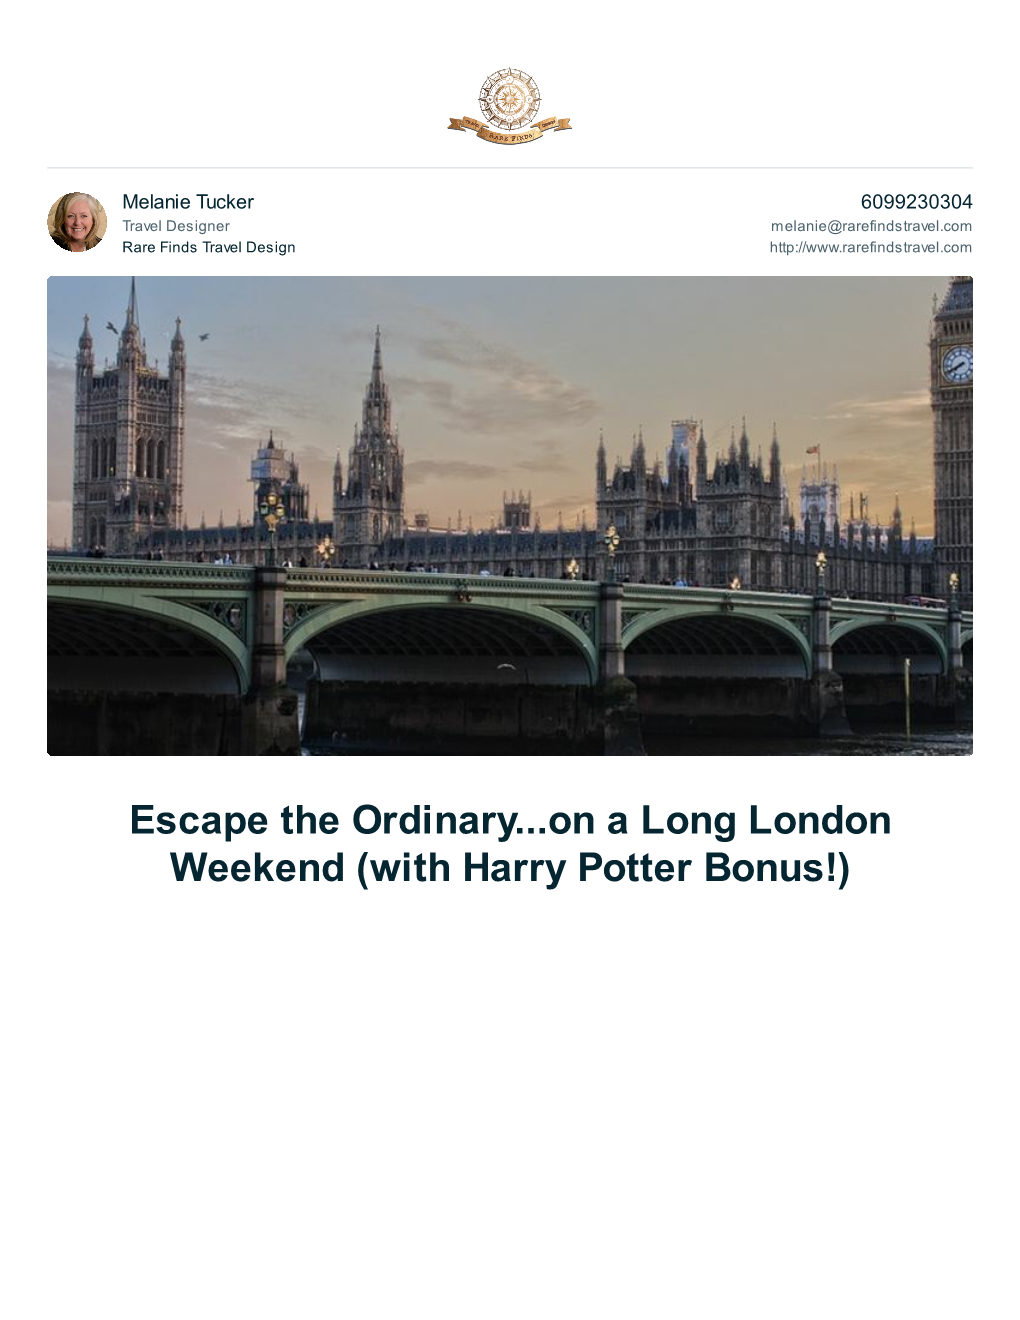 Escape the Ordinary...On a Long London Weekend (With Harry Potter Bonus!) Page 2 of 20 Trip Summary